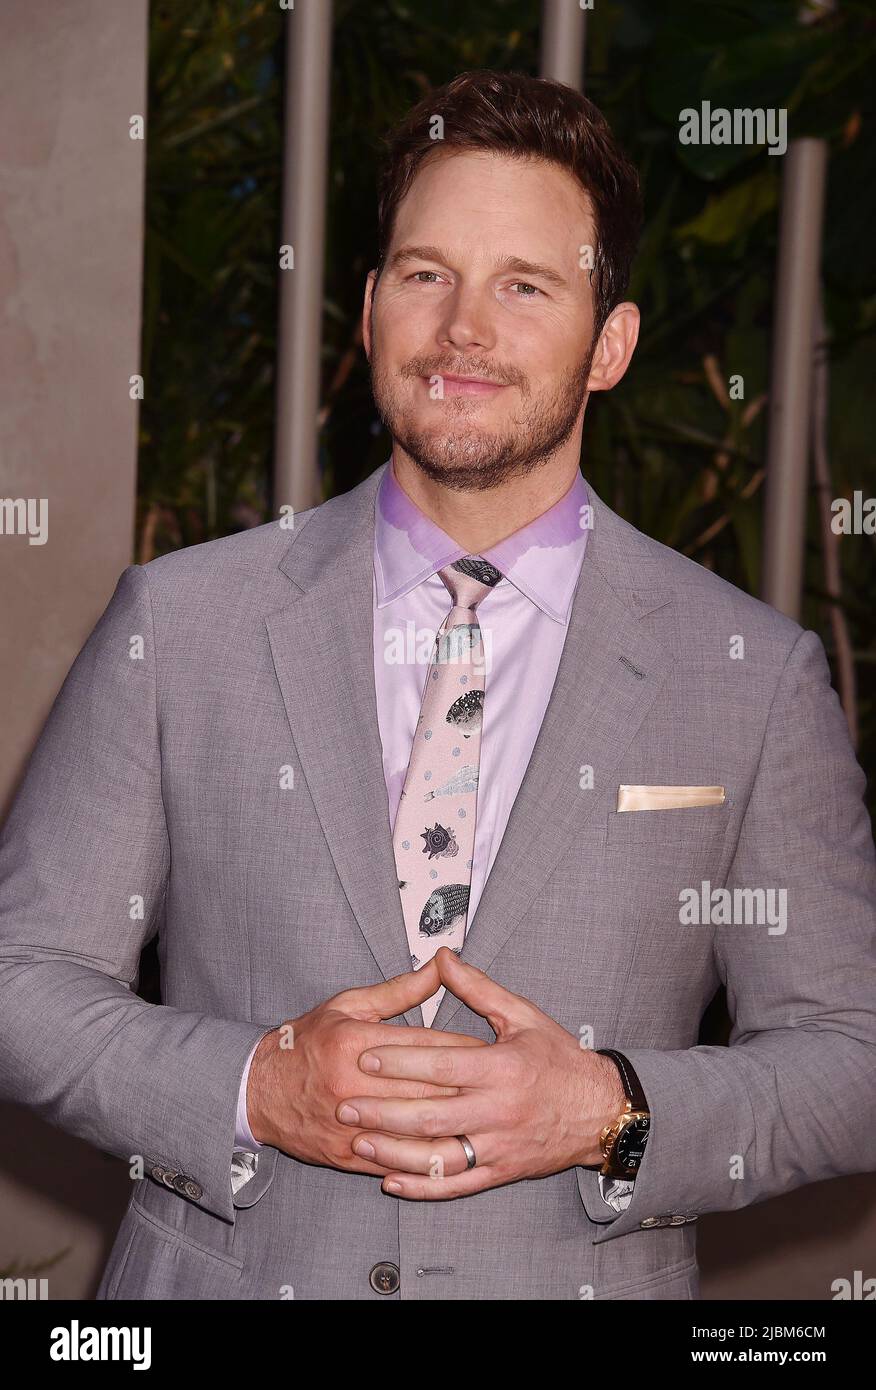 Hollywood, Ca. 06th June, 2022. Chris Pratt attends the Los Angeles premiere of Universal Pictures' 'Jurassic World Dominion' at the TCL Chinese Theatre on June 06, 2022 in Hollywood, California. Credit: Jeffrey Mayer/Jtm Photos/Media Punch/Alamy Live News Stock Photo